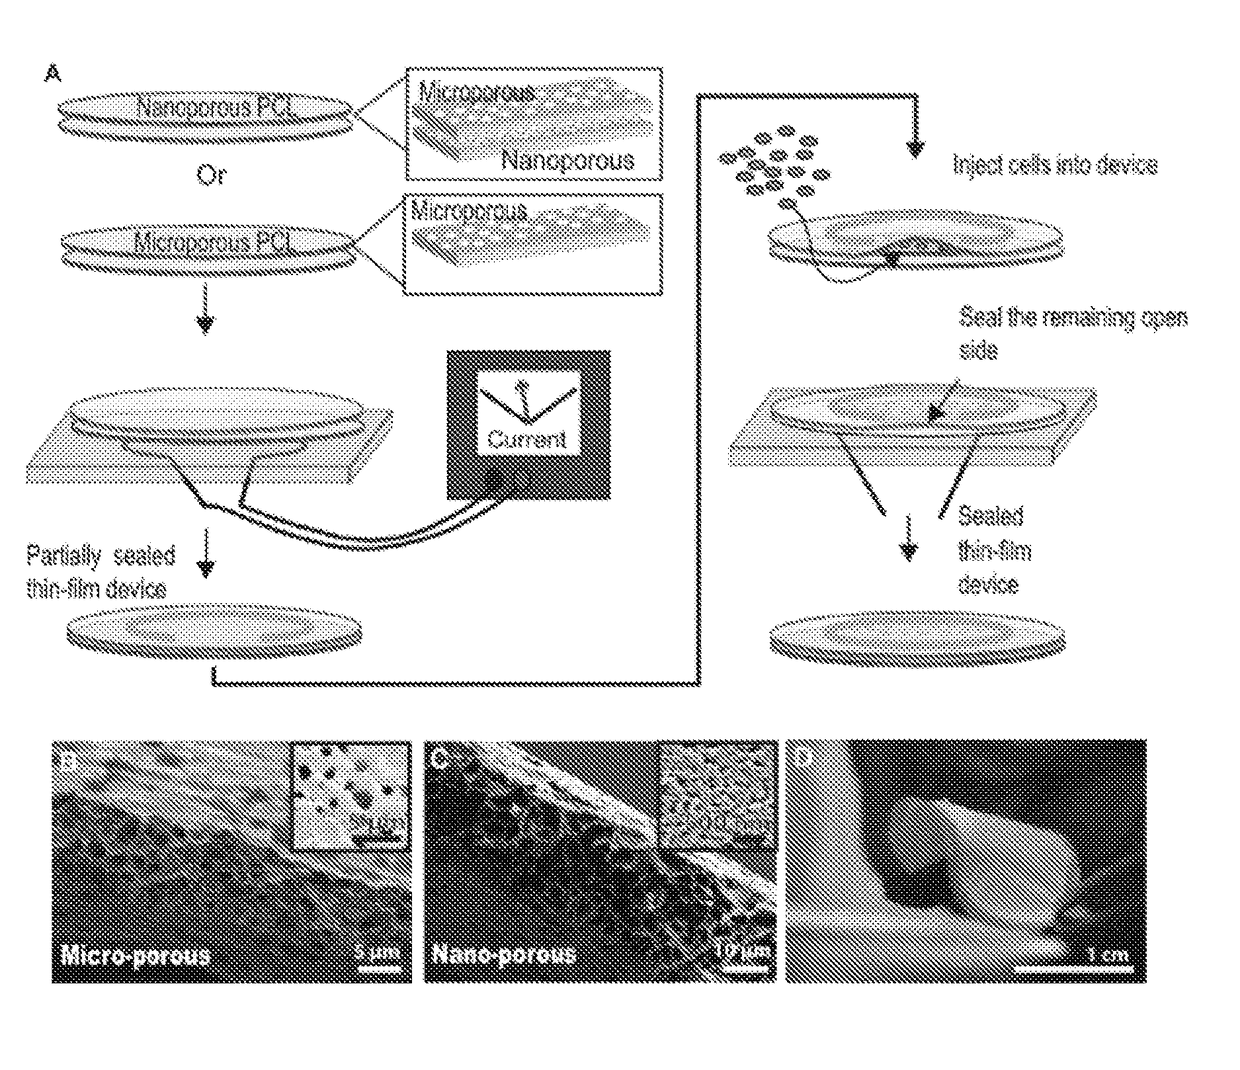 Thin film cell encapsulation devices